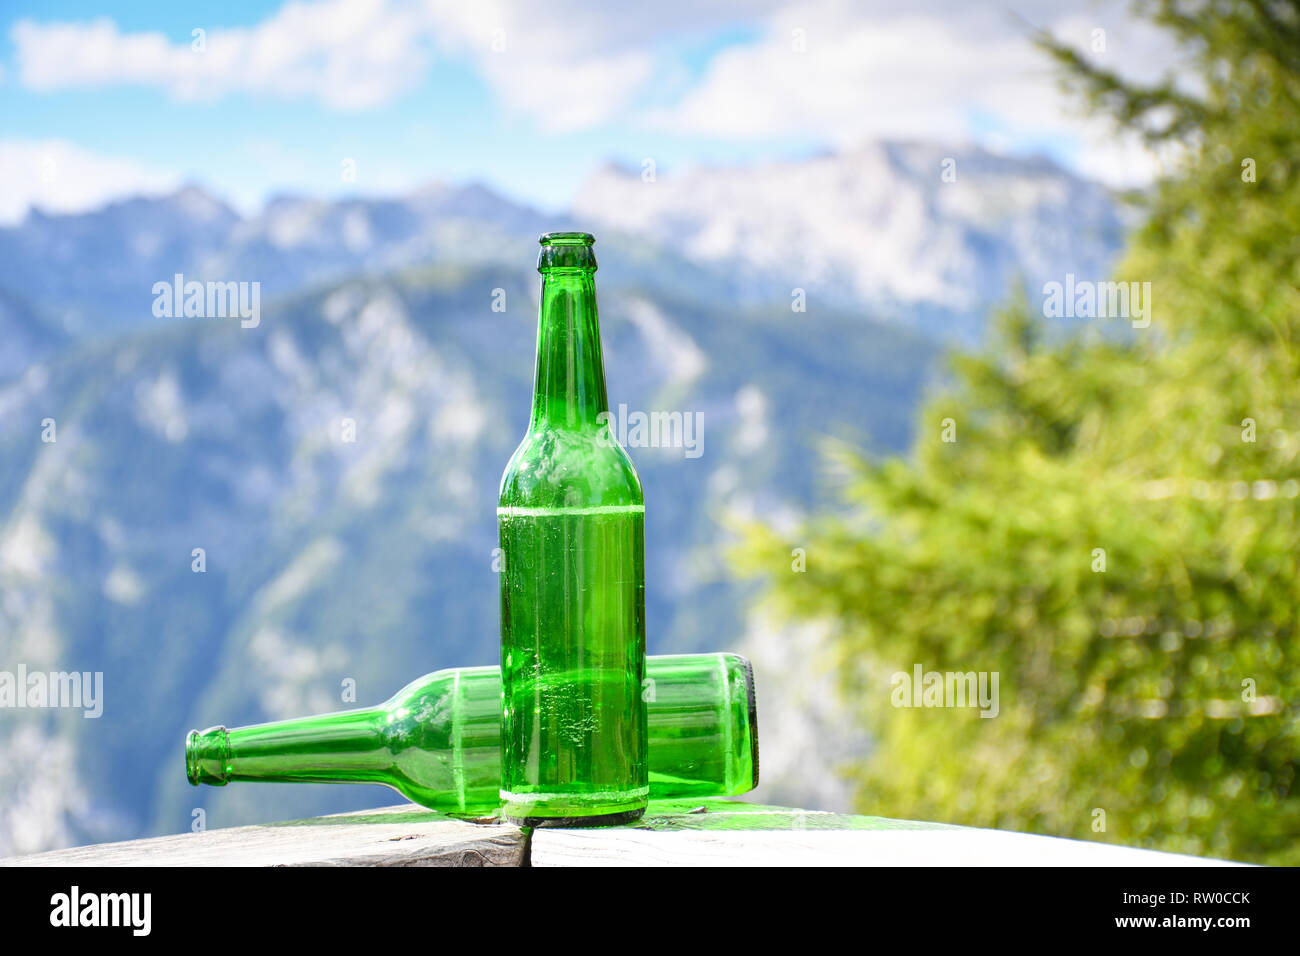 Empty green bottles of beer on a wooden fence high in the mountains background Stock Photo